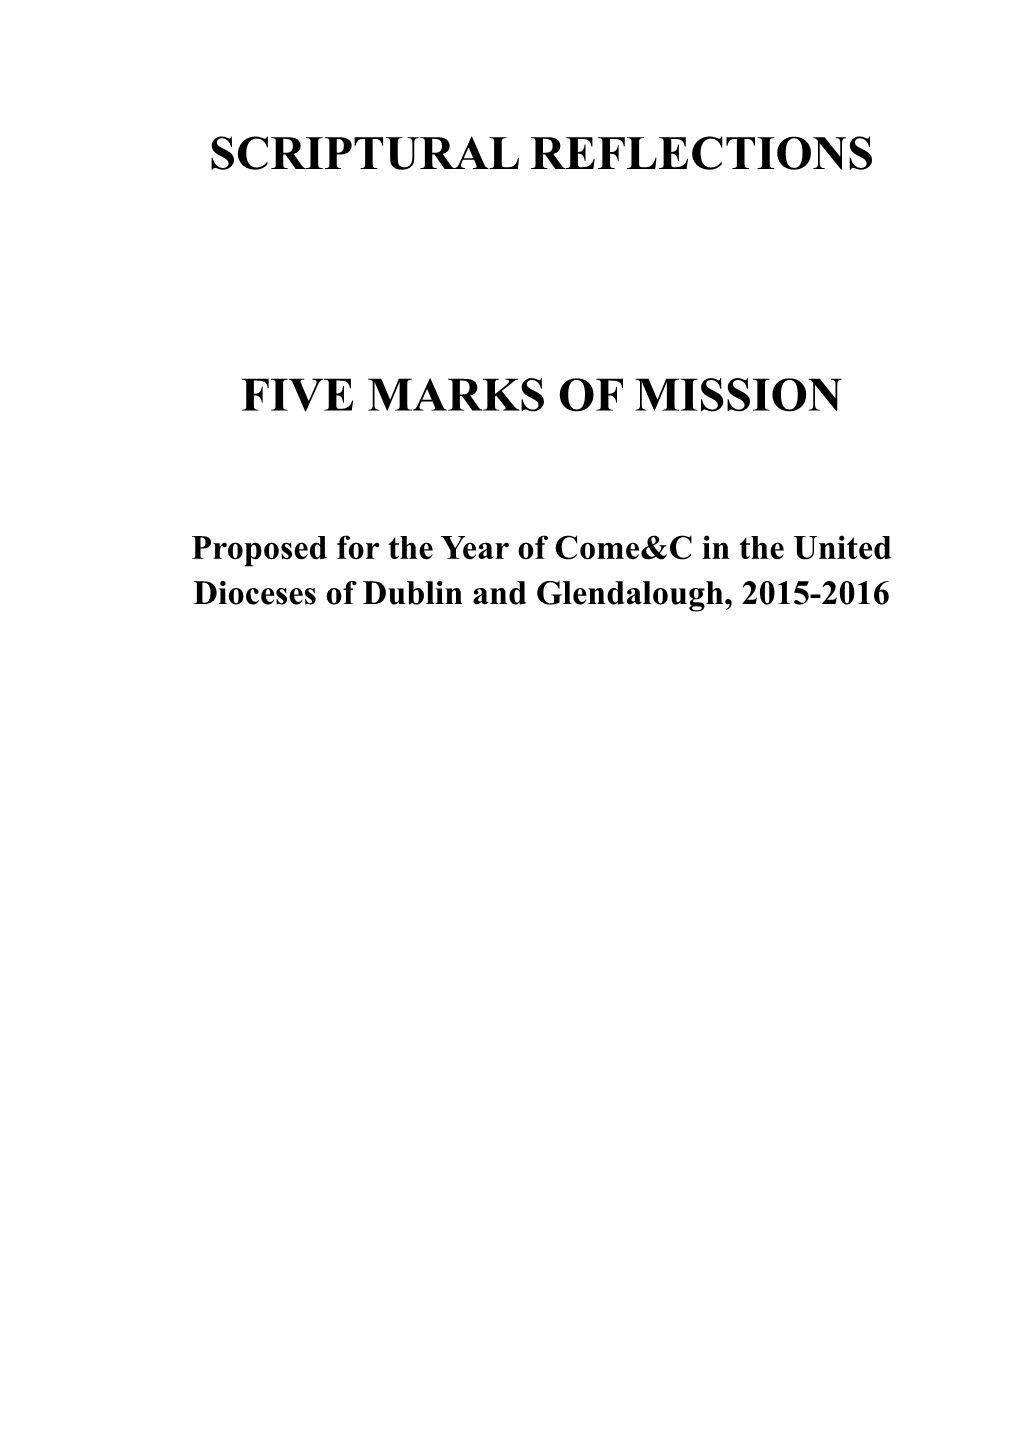 Proposed for the Year of Come&C in the United Dioceses of Dublin and Glendalough, 2015-2016